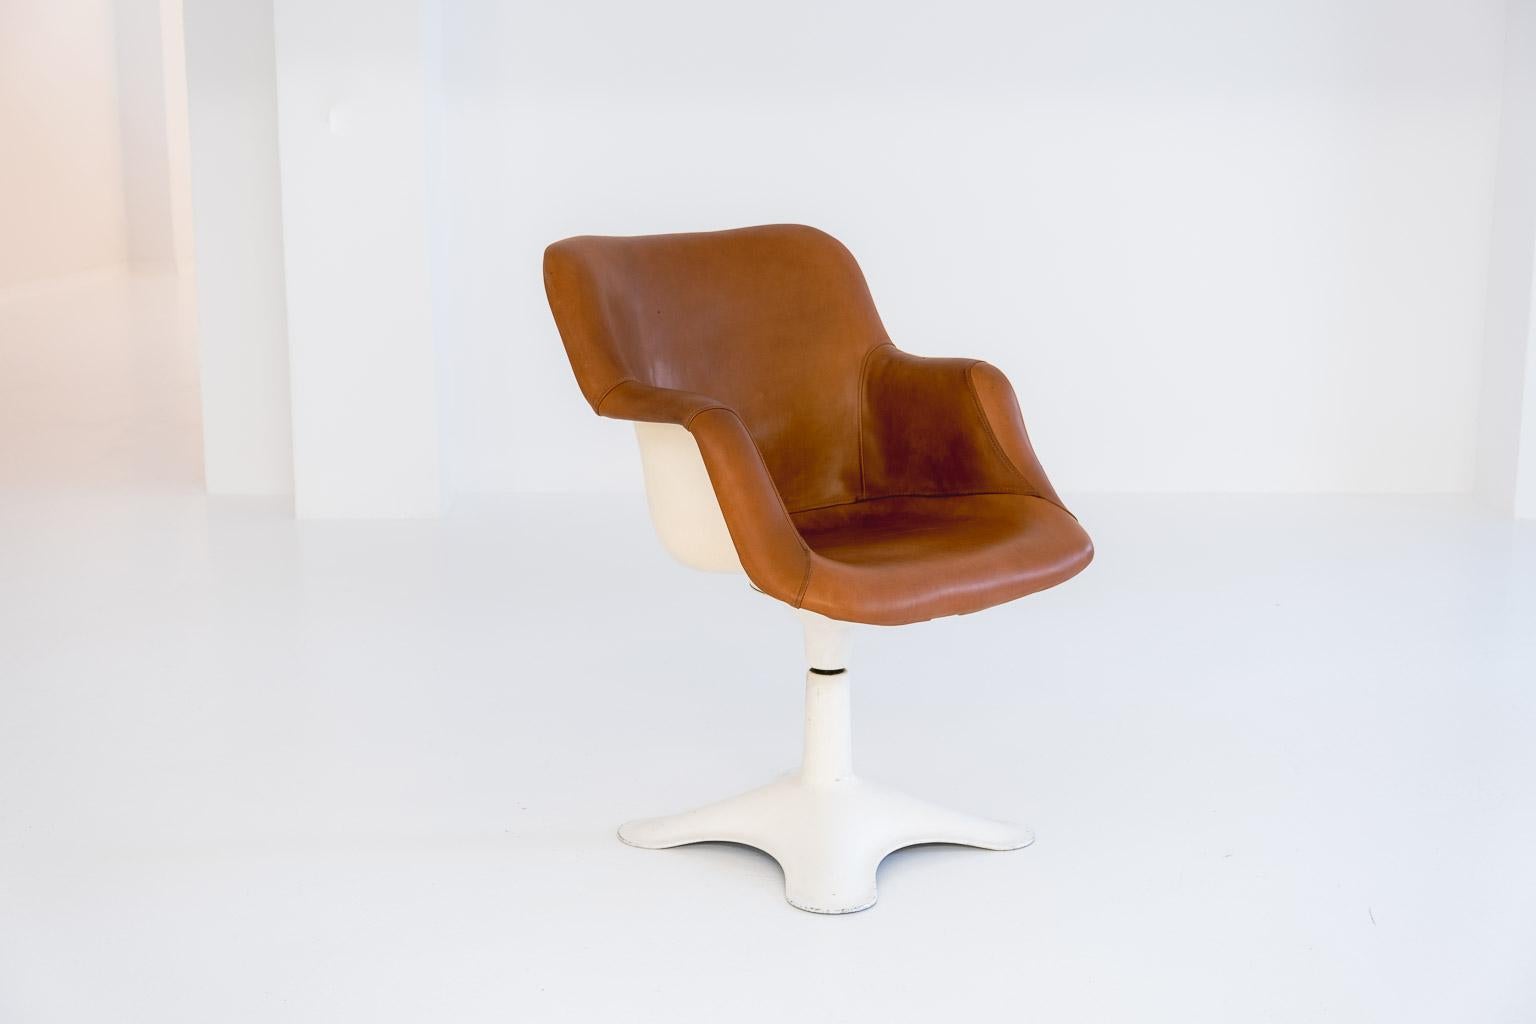 Since 1959 Yrjö Kukkapuro worked from his own studio, researching and developing ergonomic seating furniture in particular, which on the one hand often looks very futuristic but on the other turns out to be extremely comfortable. Also in the second